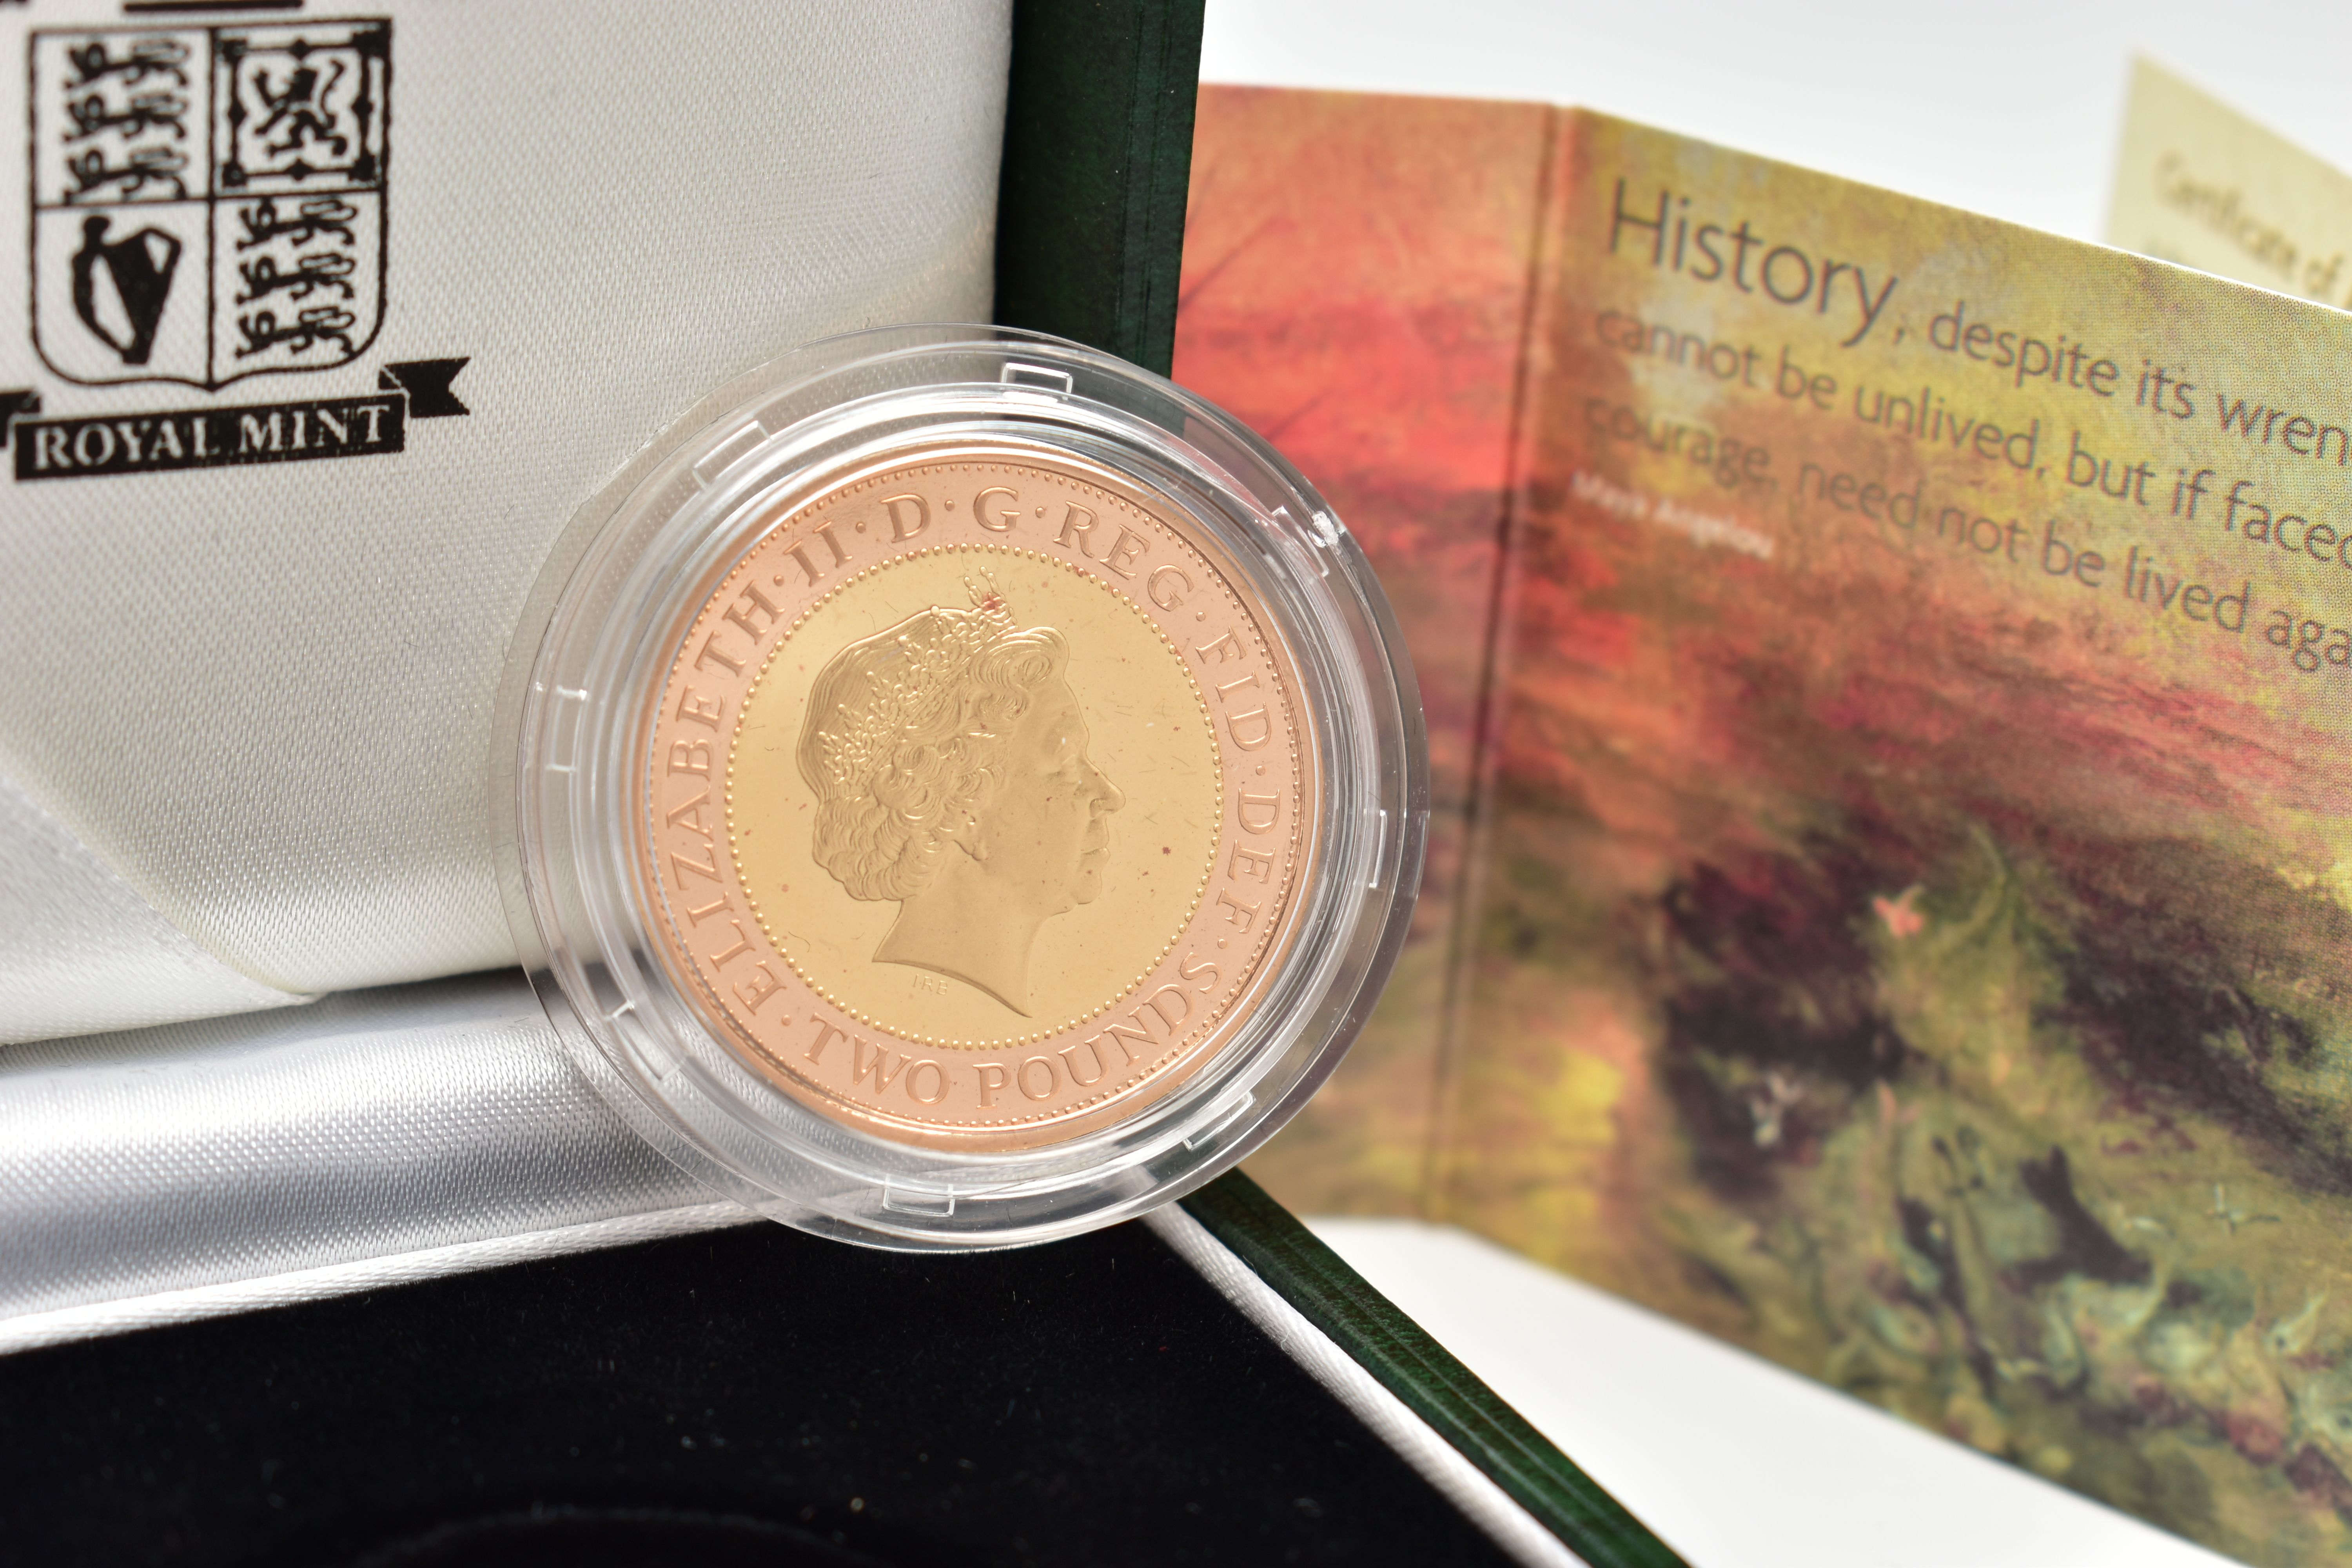 A ROYAL MINT 2007 GOLD PROOF ABOLITION OF THE SLAVE TRADE TWO POUND COIN, with red and yellow gold - Image 2 of 2